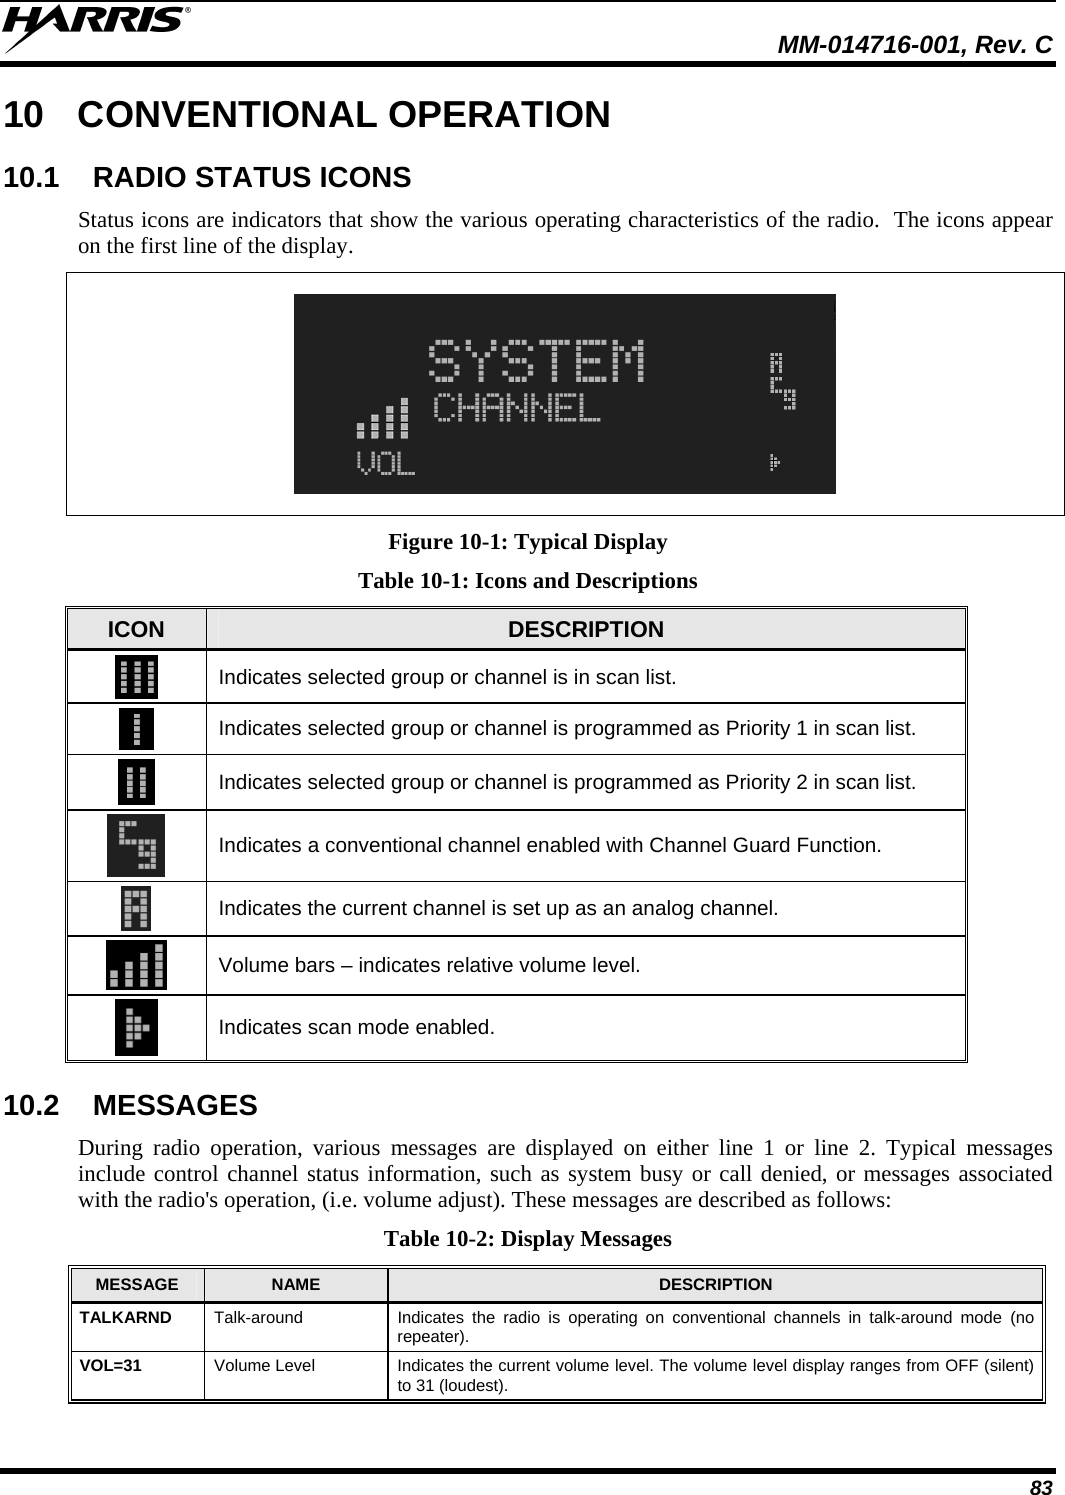  MM-014716-001, Rev. C 83 10 CONVENTIONAL OPERATION 10.1  RADIO STATUS ICONS Status icons are indicators that show the various operating characteristics of the radio.  The icons appear on the first line of the display.    Figure 10-1: Typical Display Table 10-1: Icons and Descriptions ICON  DESCRIPTION  Indicates selected group or channel is in scan list.  Indicates selected group or channel is programmed as Priority 1 in scan list.  Indicates selected group or channel is programmed as Priority 2 in scan list.  Indicates a conventional channel enabled with Channel Guard Function.  Indicates the current channel is set up as an analog channel.  Volume bars – indicates relative volume level.  Indicates scan mode enabled. 10.2 MESSAGES During radio operation, various messages are displayed on either line 1 or line 2. Typical messages include control channel status information, such as system busy or call denied, or messages associated with the radio&apos;s operation, (i.e. volume adjust). These messages are described as follows: Table 10-2: Display Messages MESSAGE  NAME  DESCRIPTION TALKARND  Talk-around  Indicates the radio is operating on conventional channels in talk-around mode (no repeater). VOL=31  Volume Level  Indicates the current volume level. The volume level display ranges from OFF (silent) to 31 (loudest). 